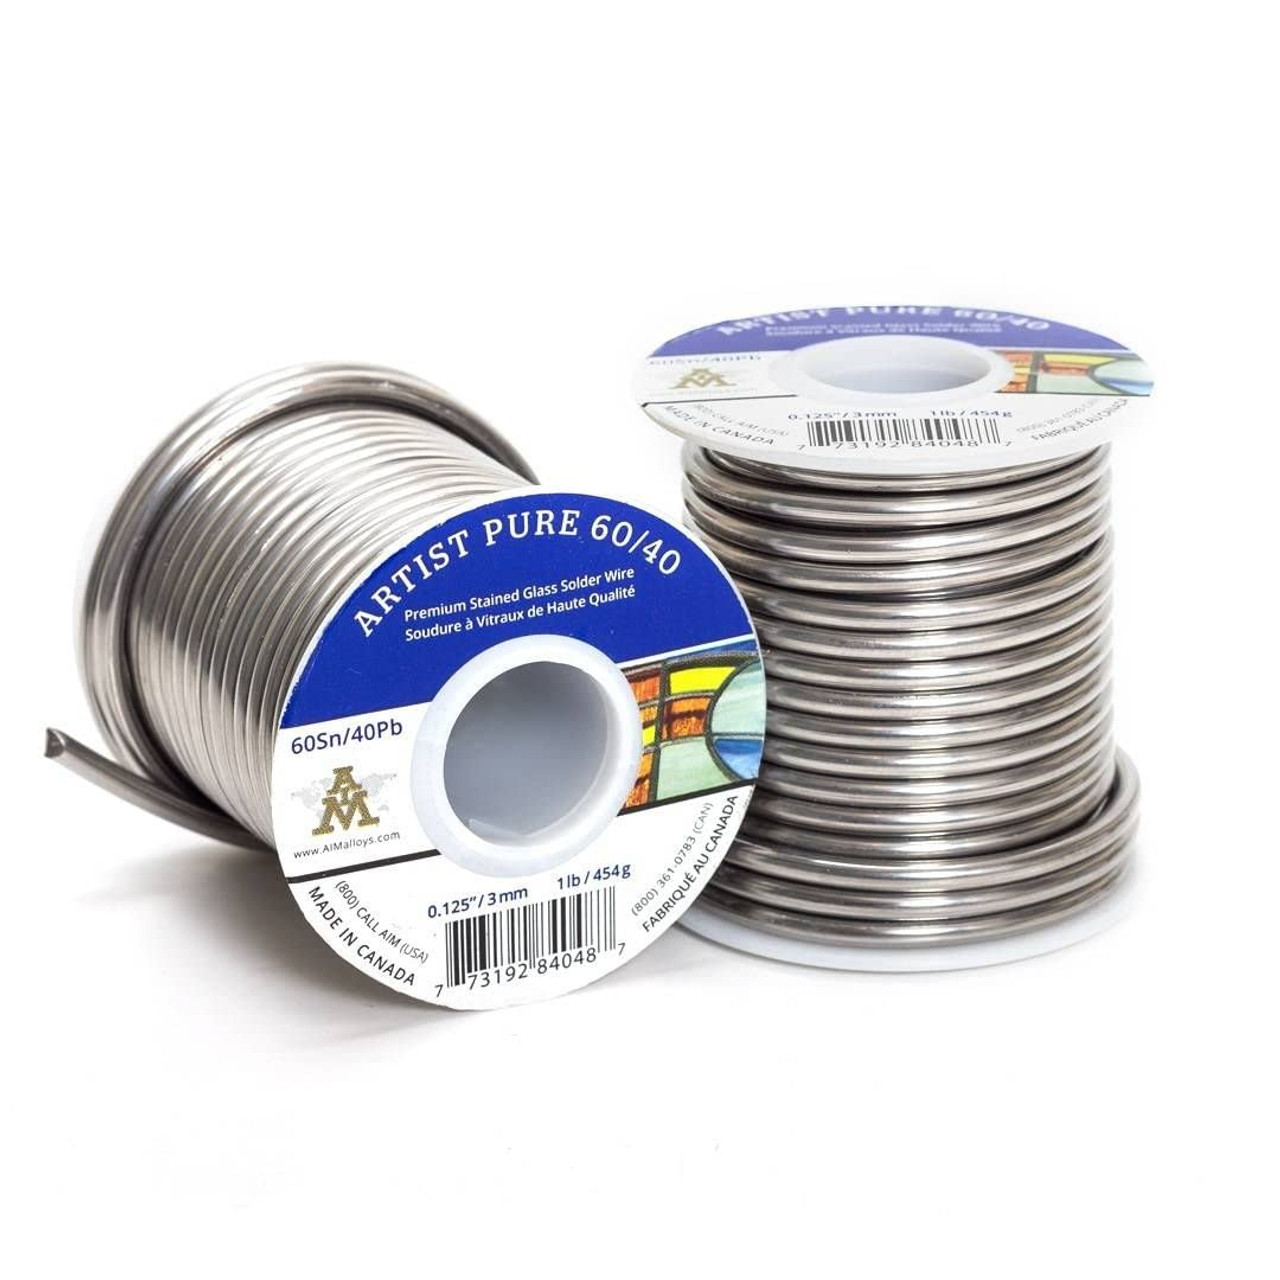 60/40 Solder for Stained Glass - 1 lb. spool